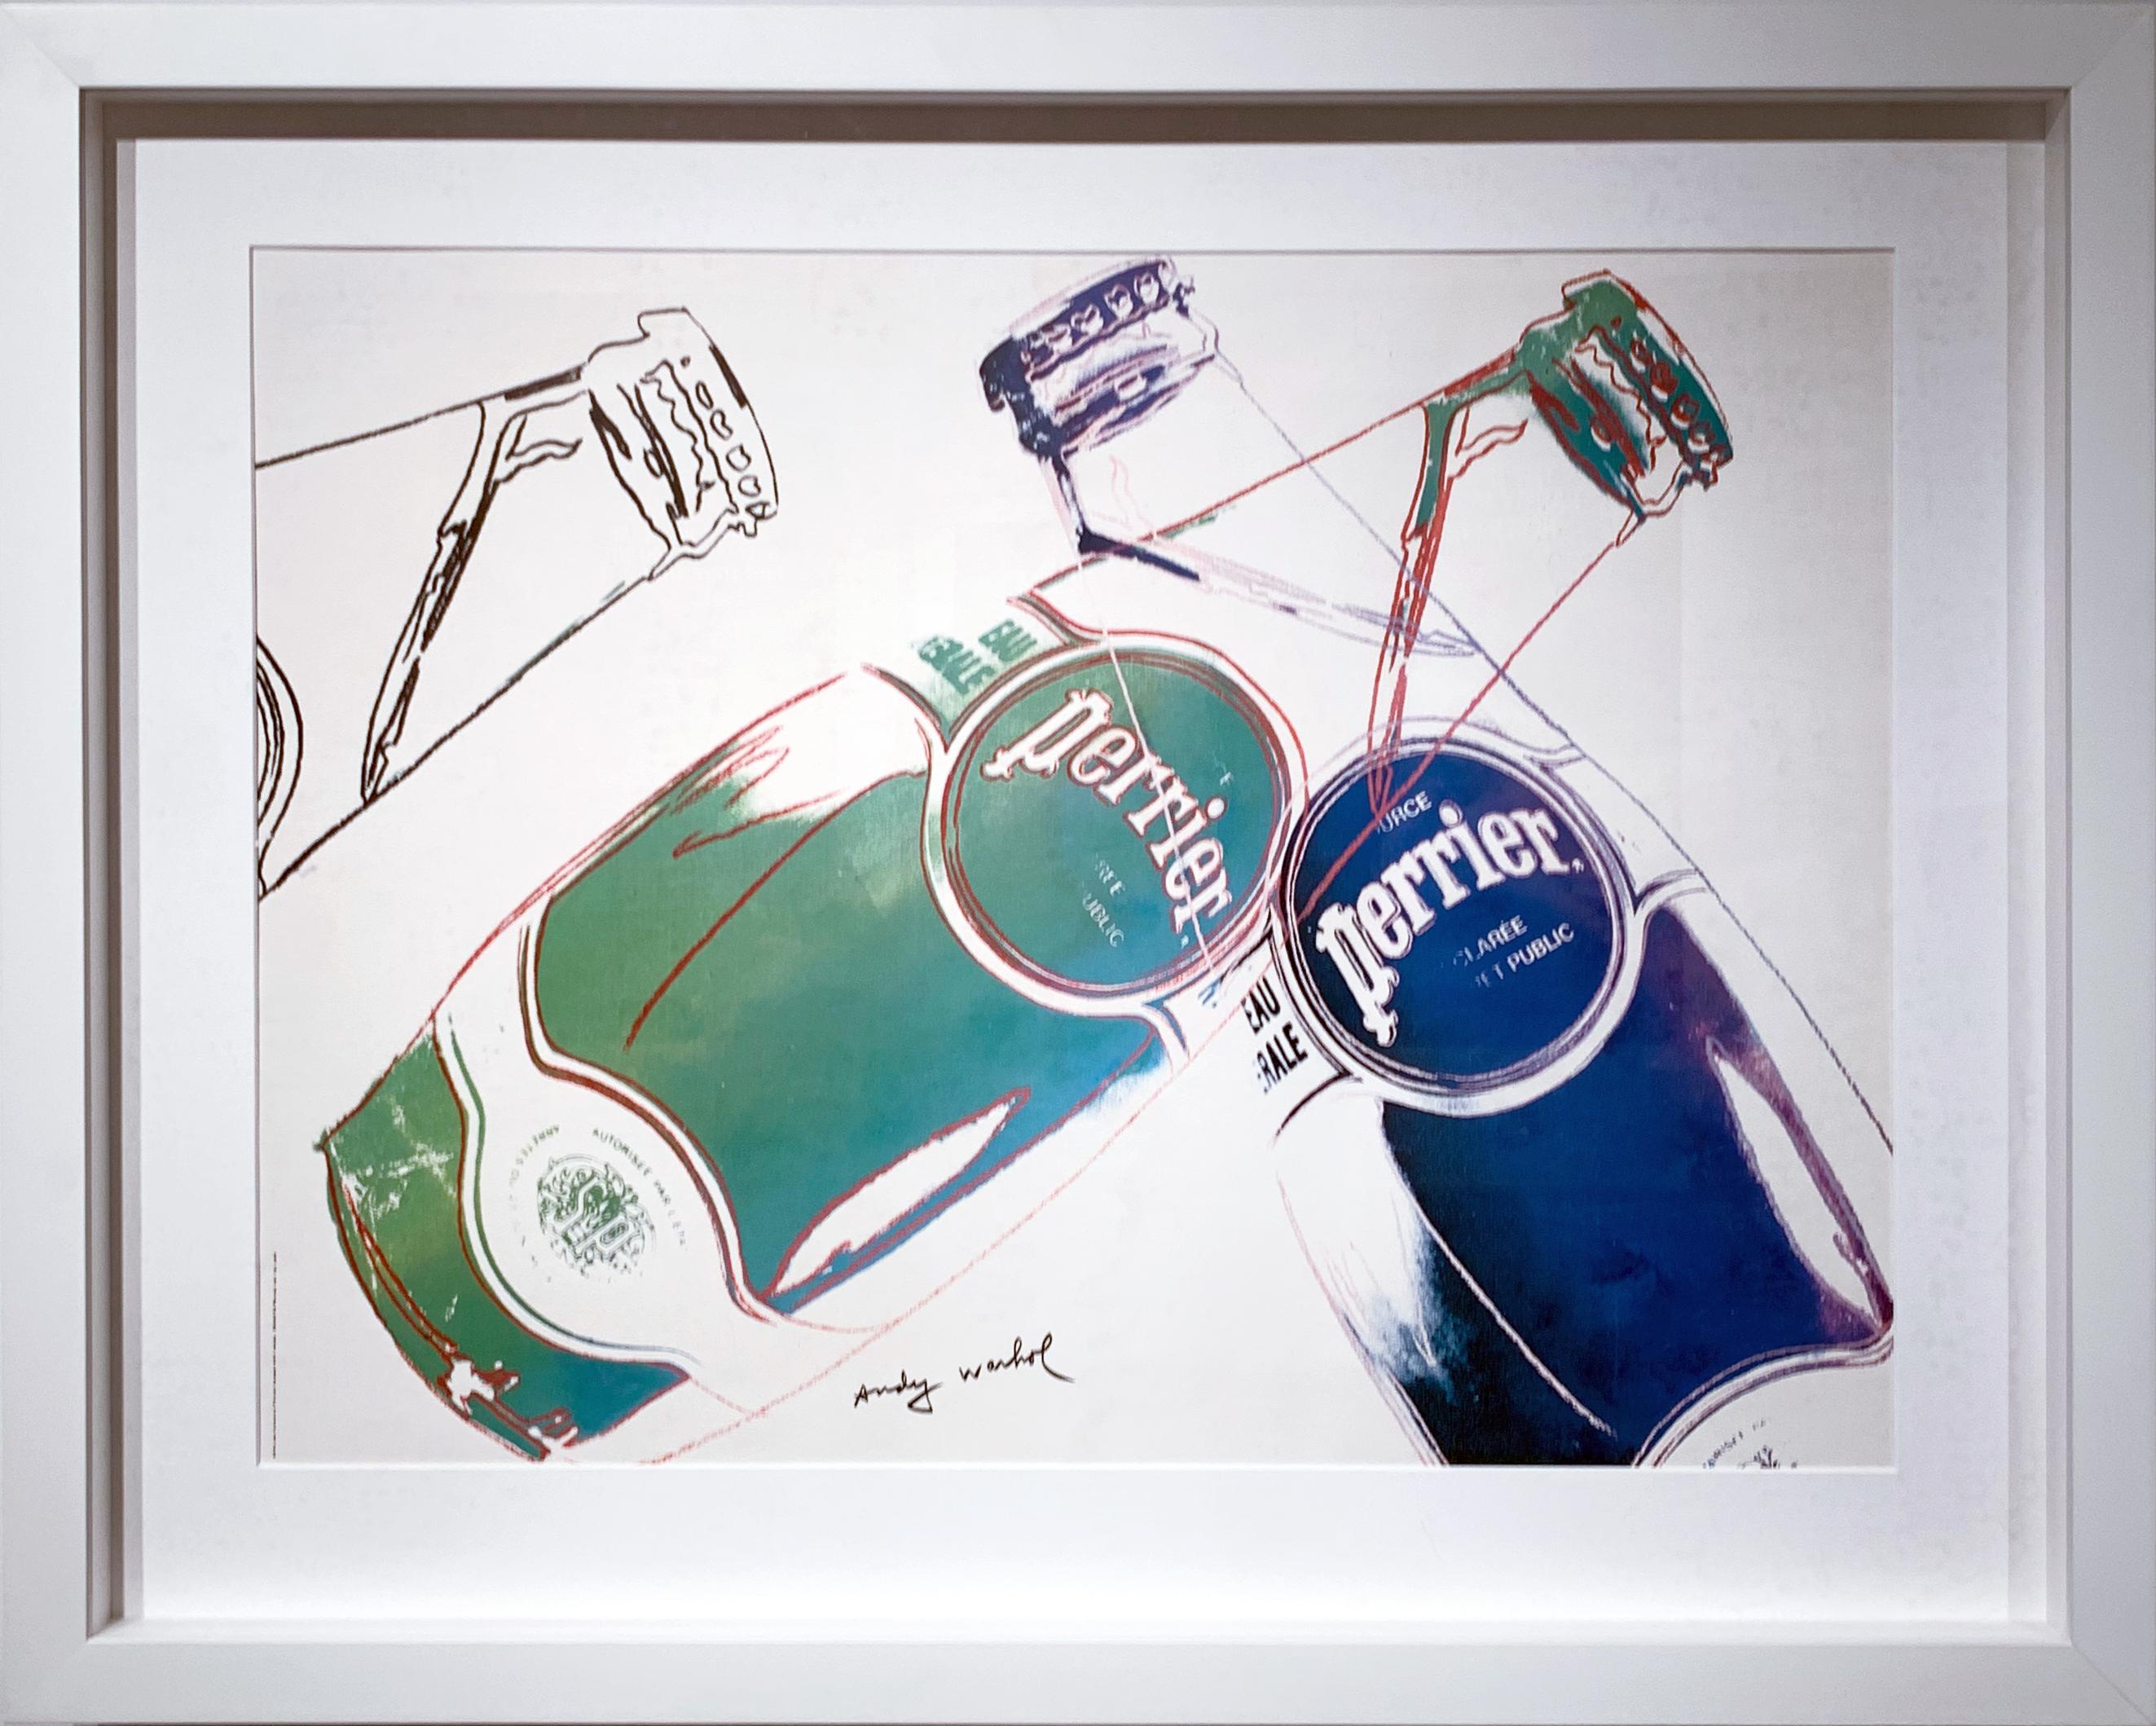 Perrier - Print by (after) Andy Warhol